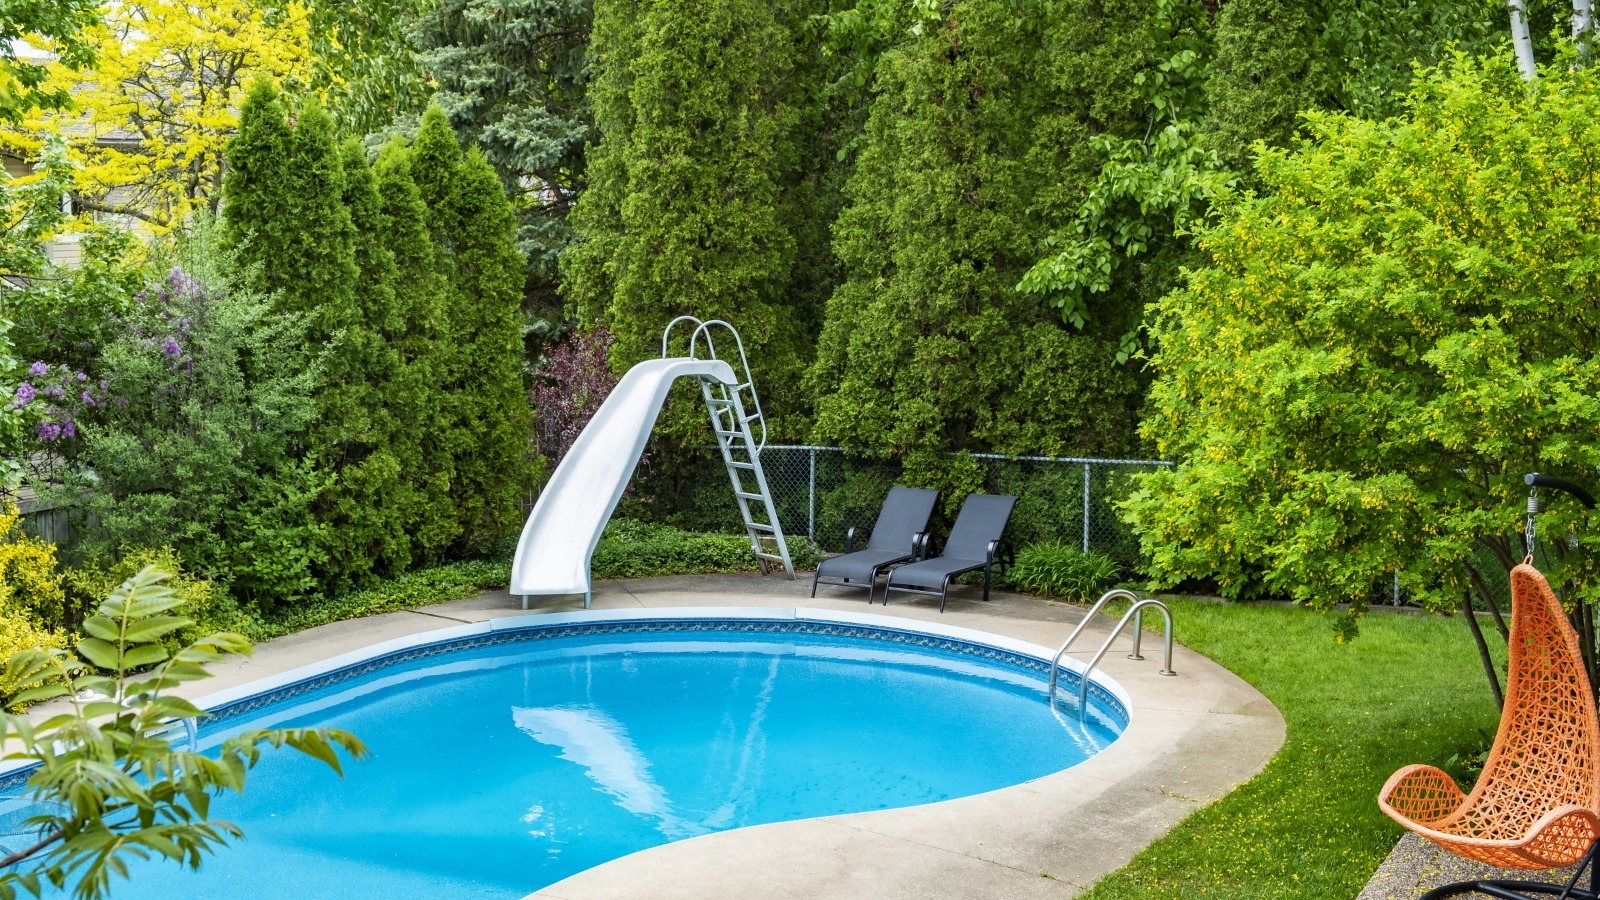 Considering a Pool Slide? Here's What You Need to Know